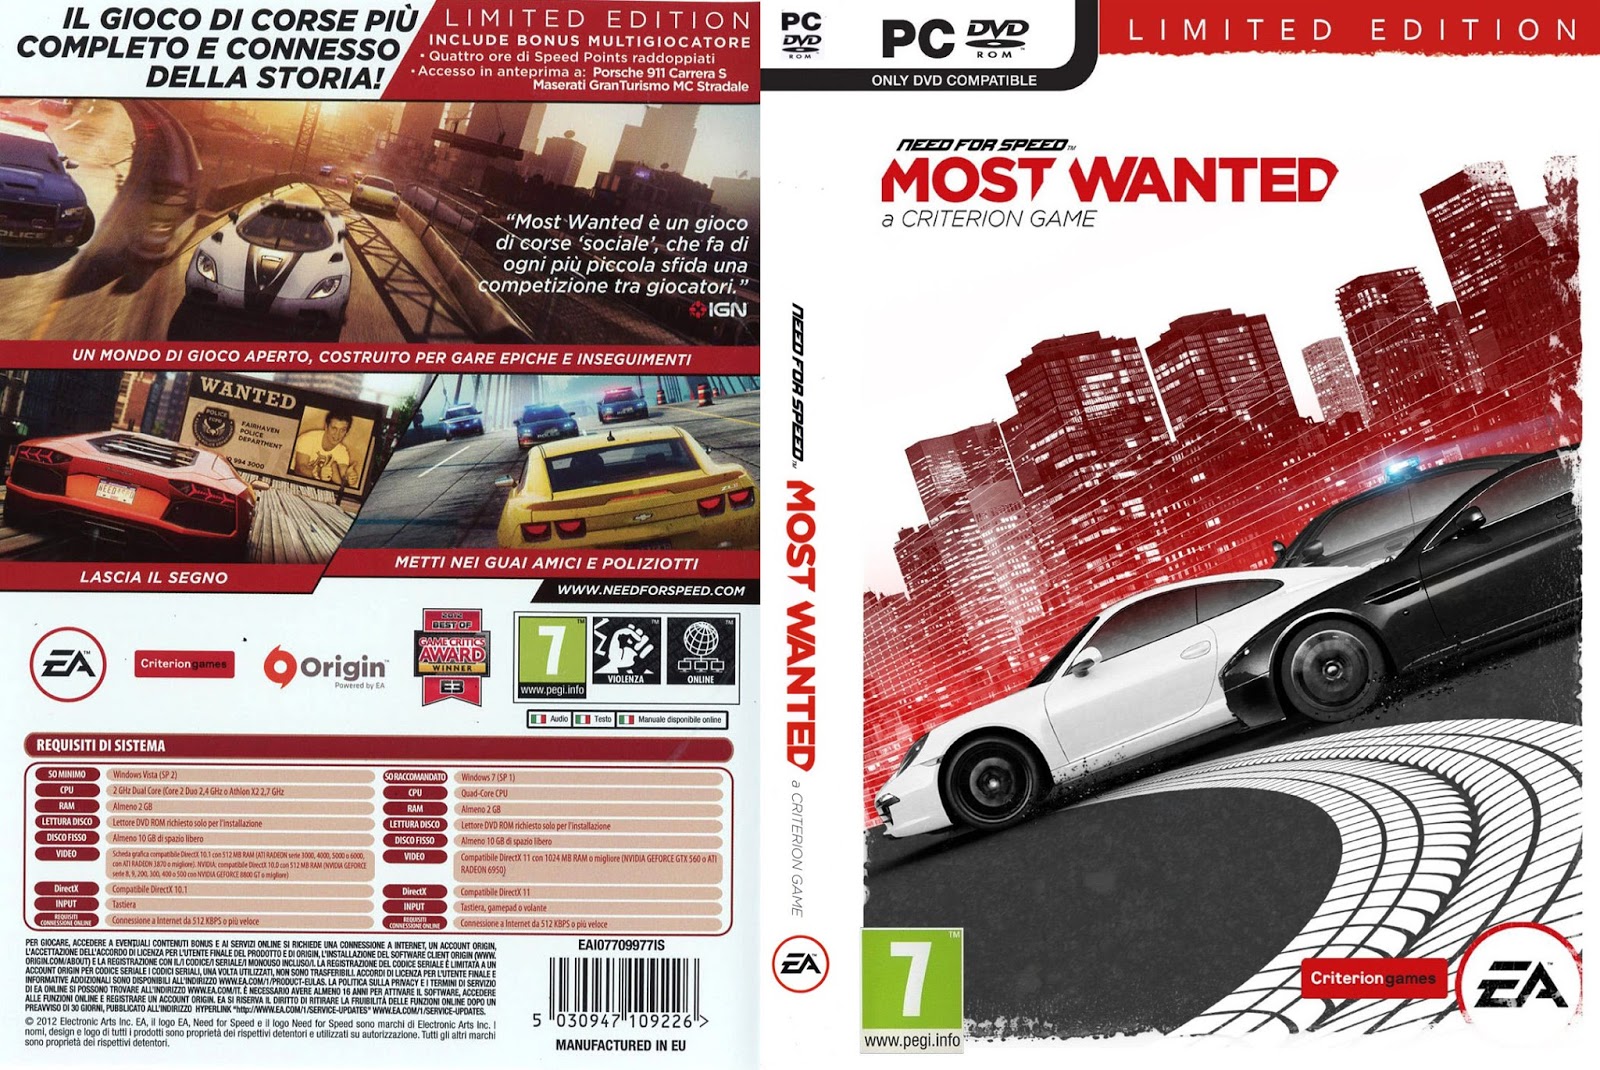 Need for speed most wanted 2012 download for pc highly compressed